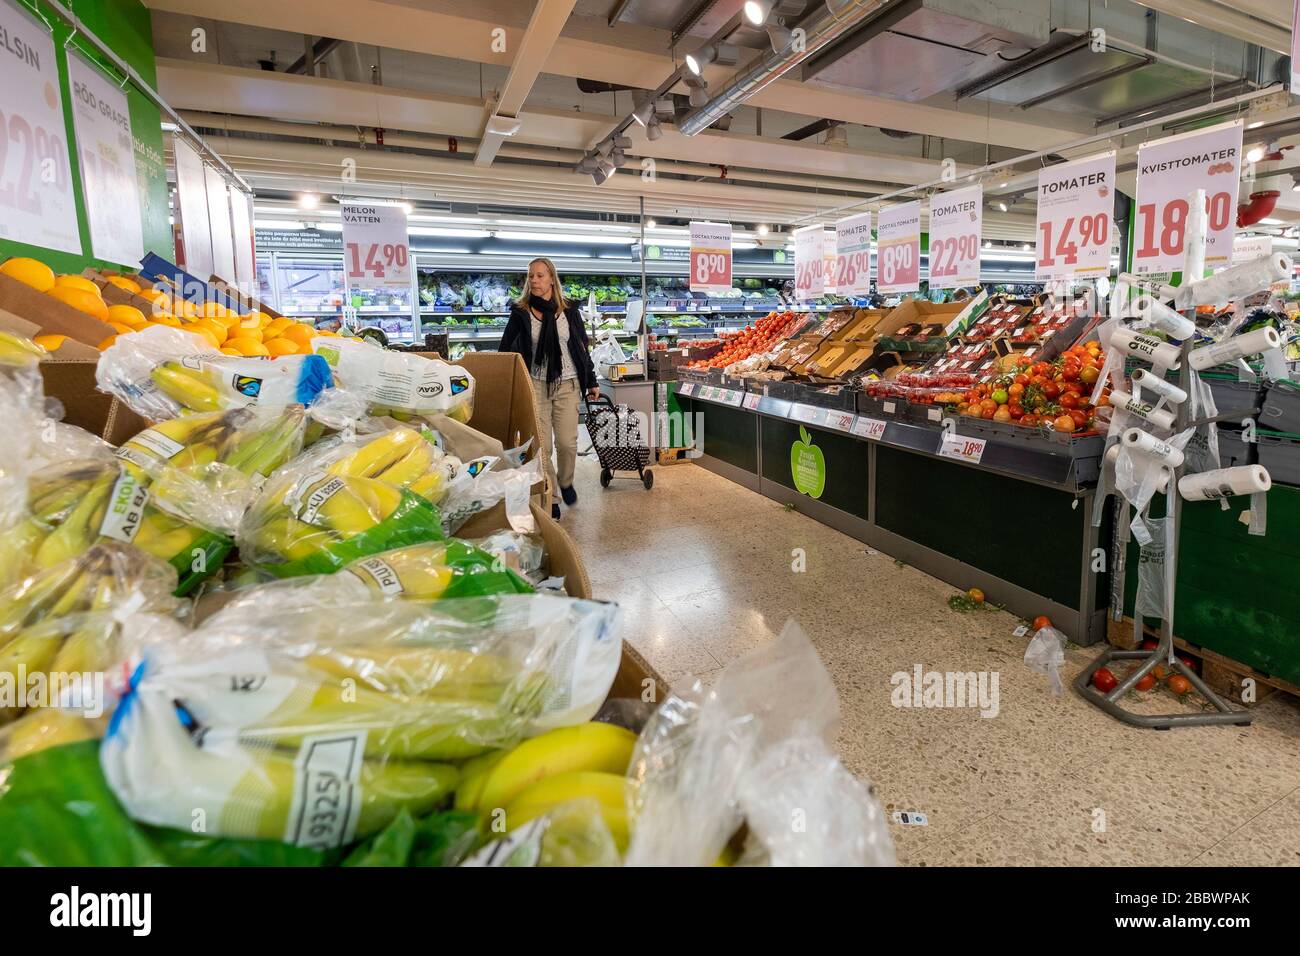 Woman browsing the fruit and vegetables produce aisle at Willys discount grocery chain in Gothenburg, Sweden, Europe Stock Photo